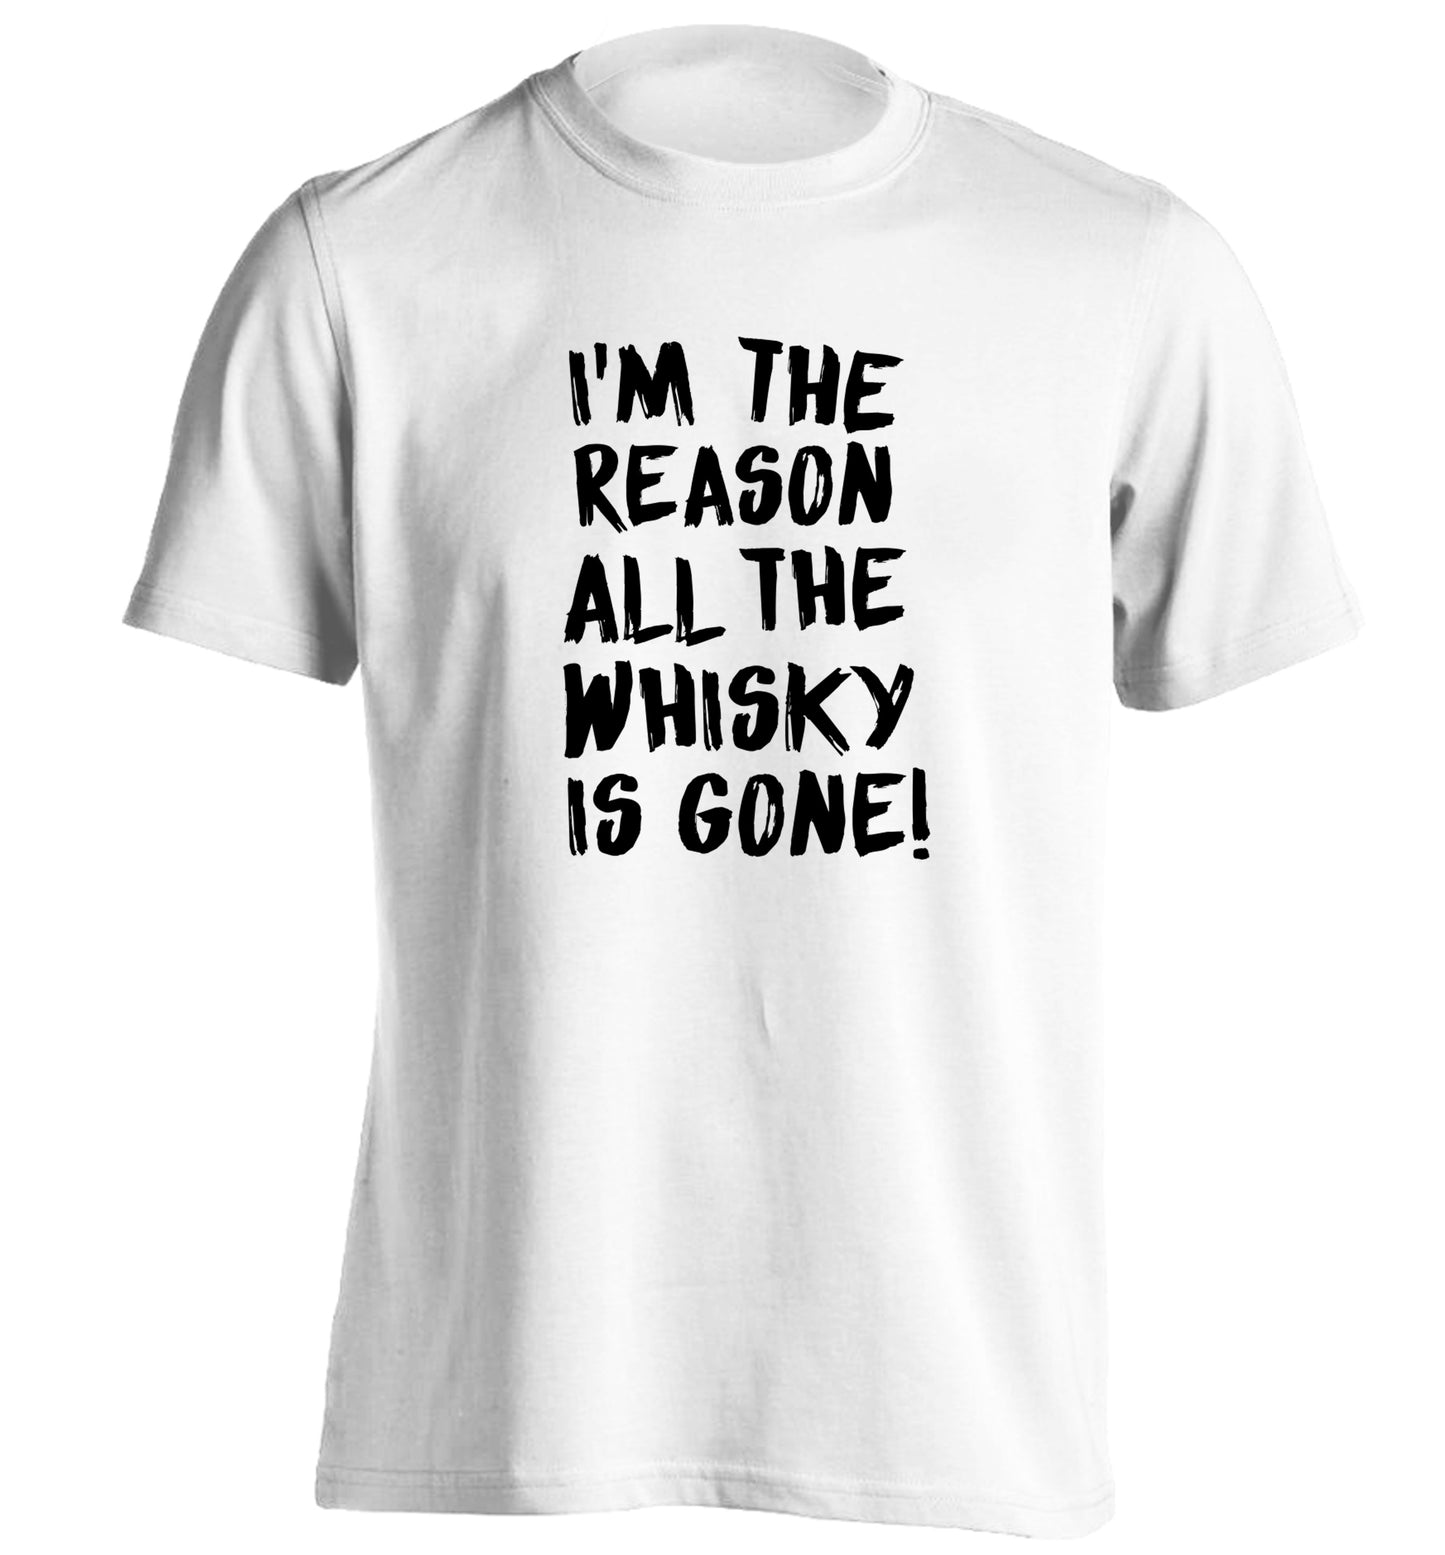 I'm the reason all the whisky is gone adults unisex white Tshirt 2XL